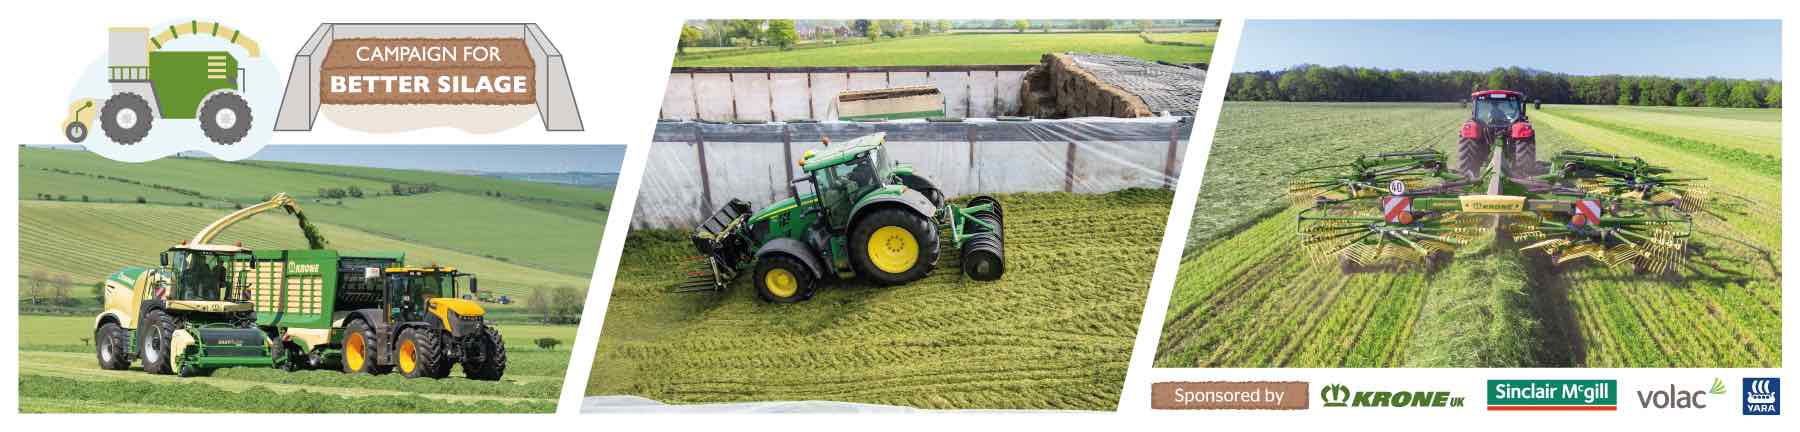 Campaign for better silage header image